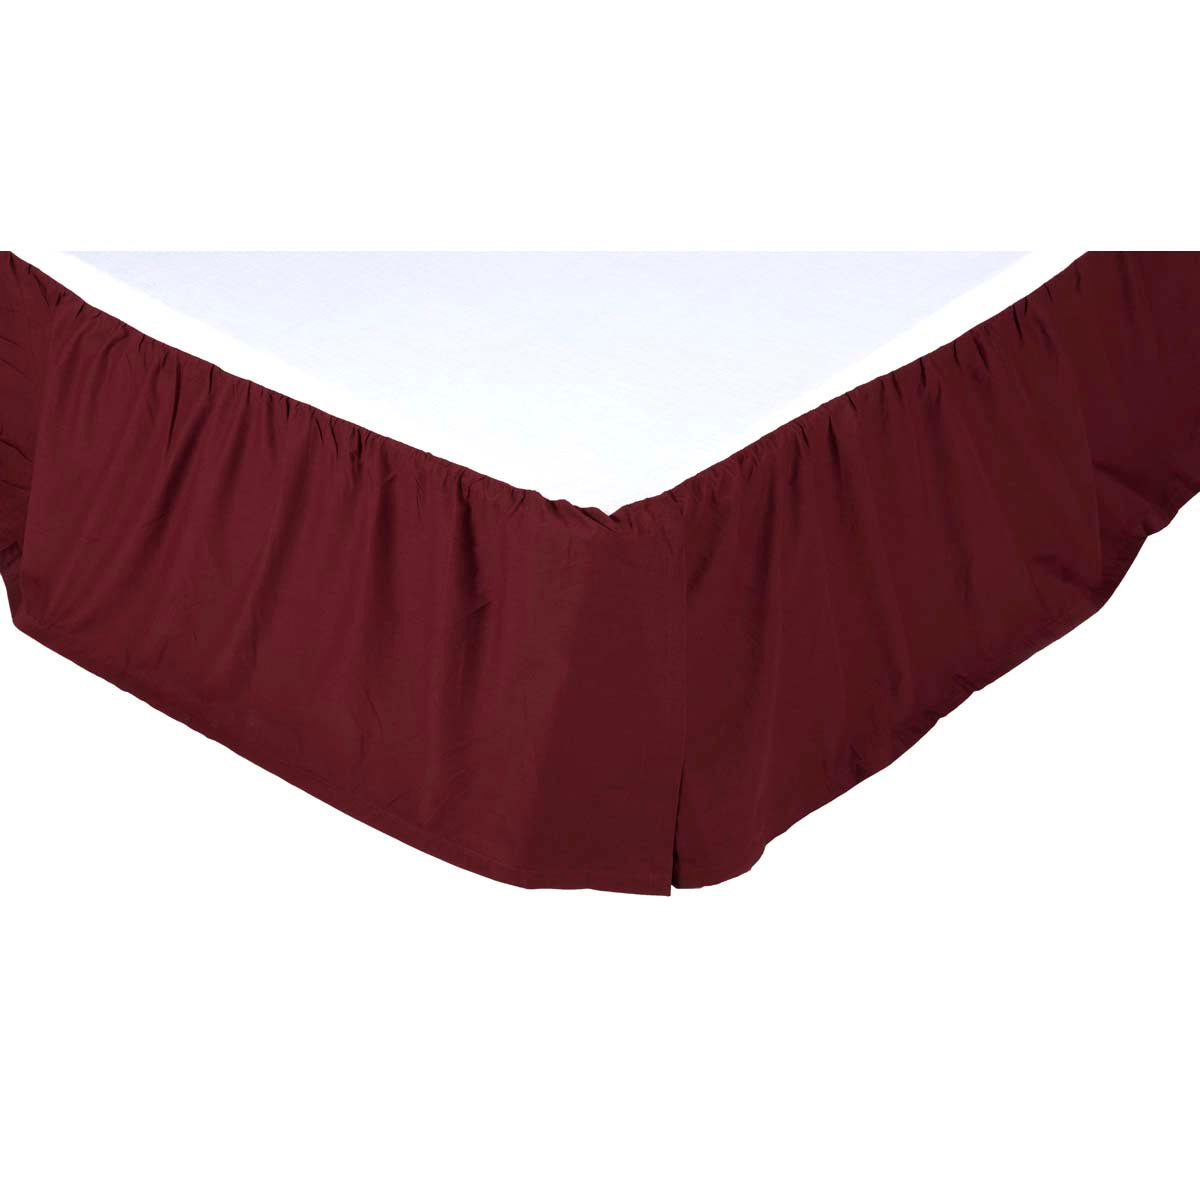 13614-Solid-Burgundy-King-Bed-Skirt-78x80x16-image-2